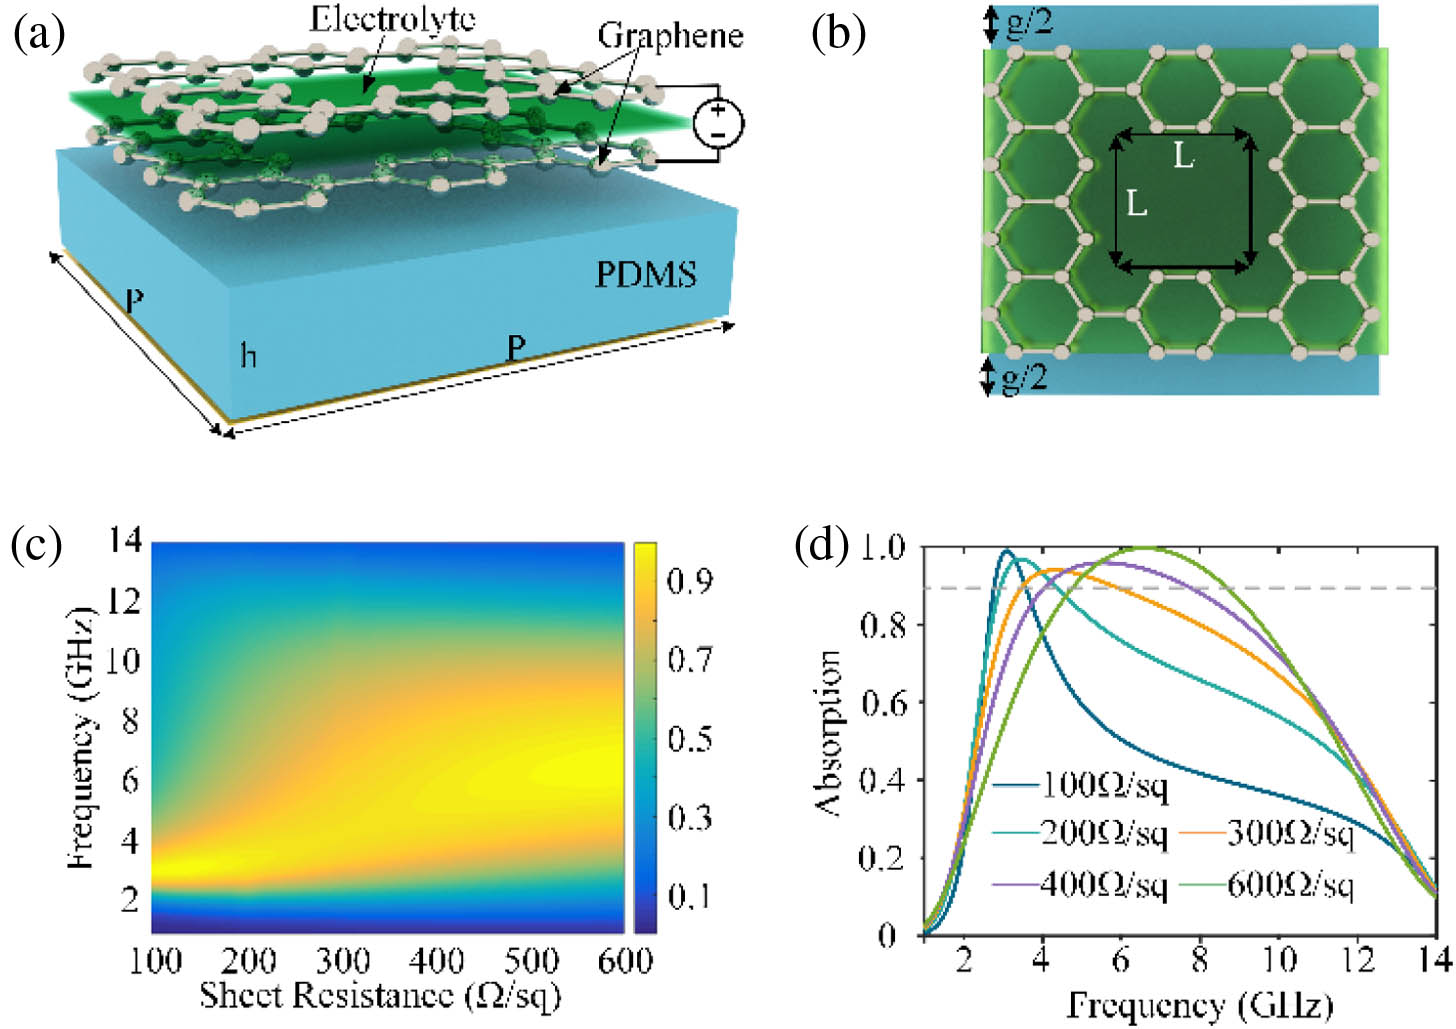 Designed element of the graphene-based absorbing metasurface and its simulated electromagnetic response. (a) The geometrical model of unit cell that incorporates the graphene capacitor layer, the PDMS substrate, and the metal ground. (b) The top view of the unit cell. (c) The simulated absorption as a function of frequency and the sheet resistance of the graphene. (d) The simulated absorption of the proposed absorbing metasurface with the different sheet resistance of the graphene.